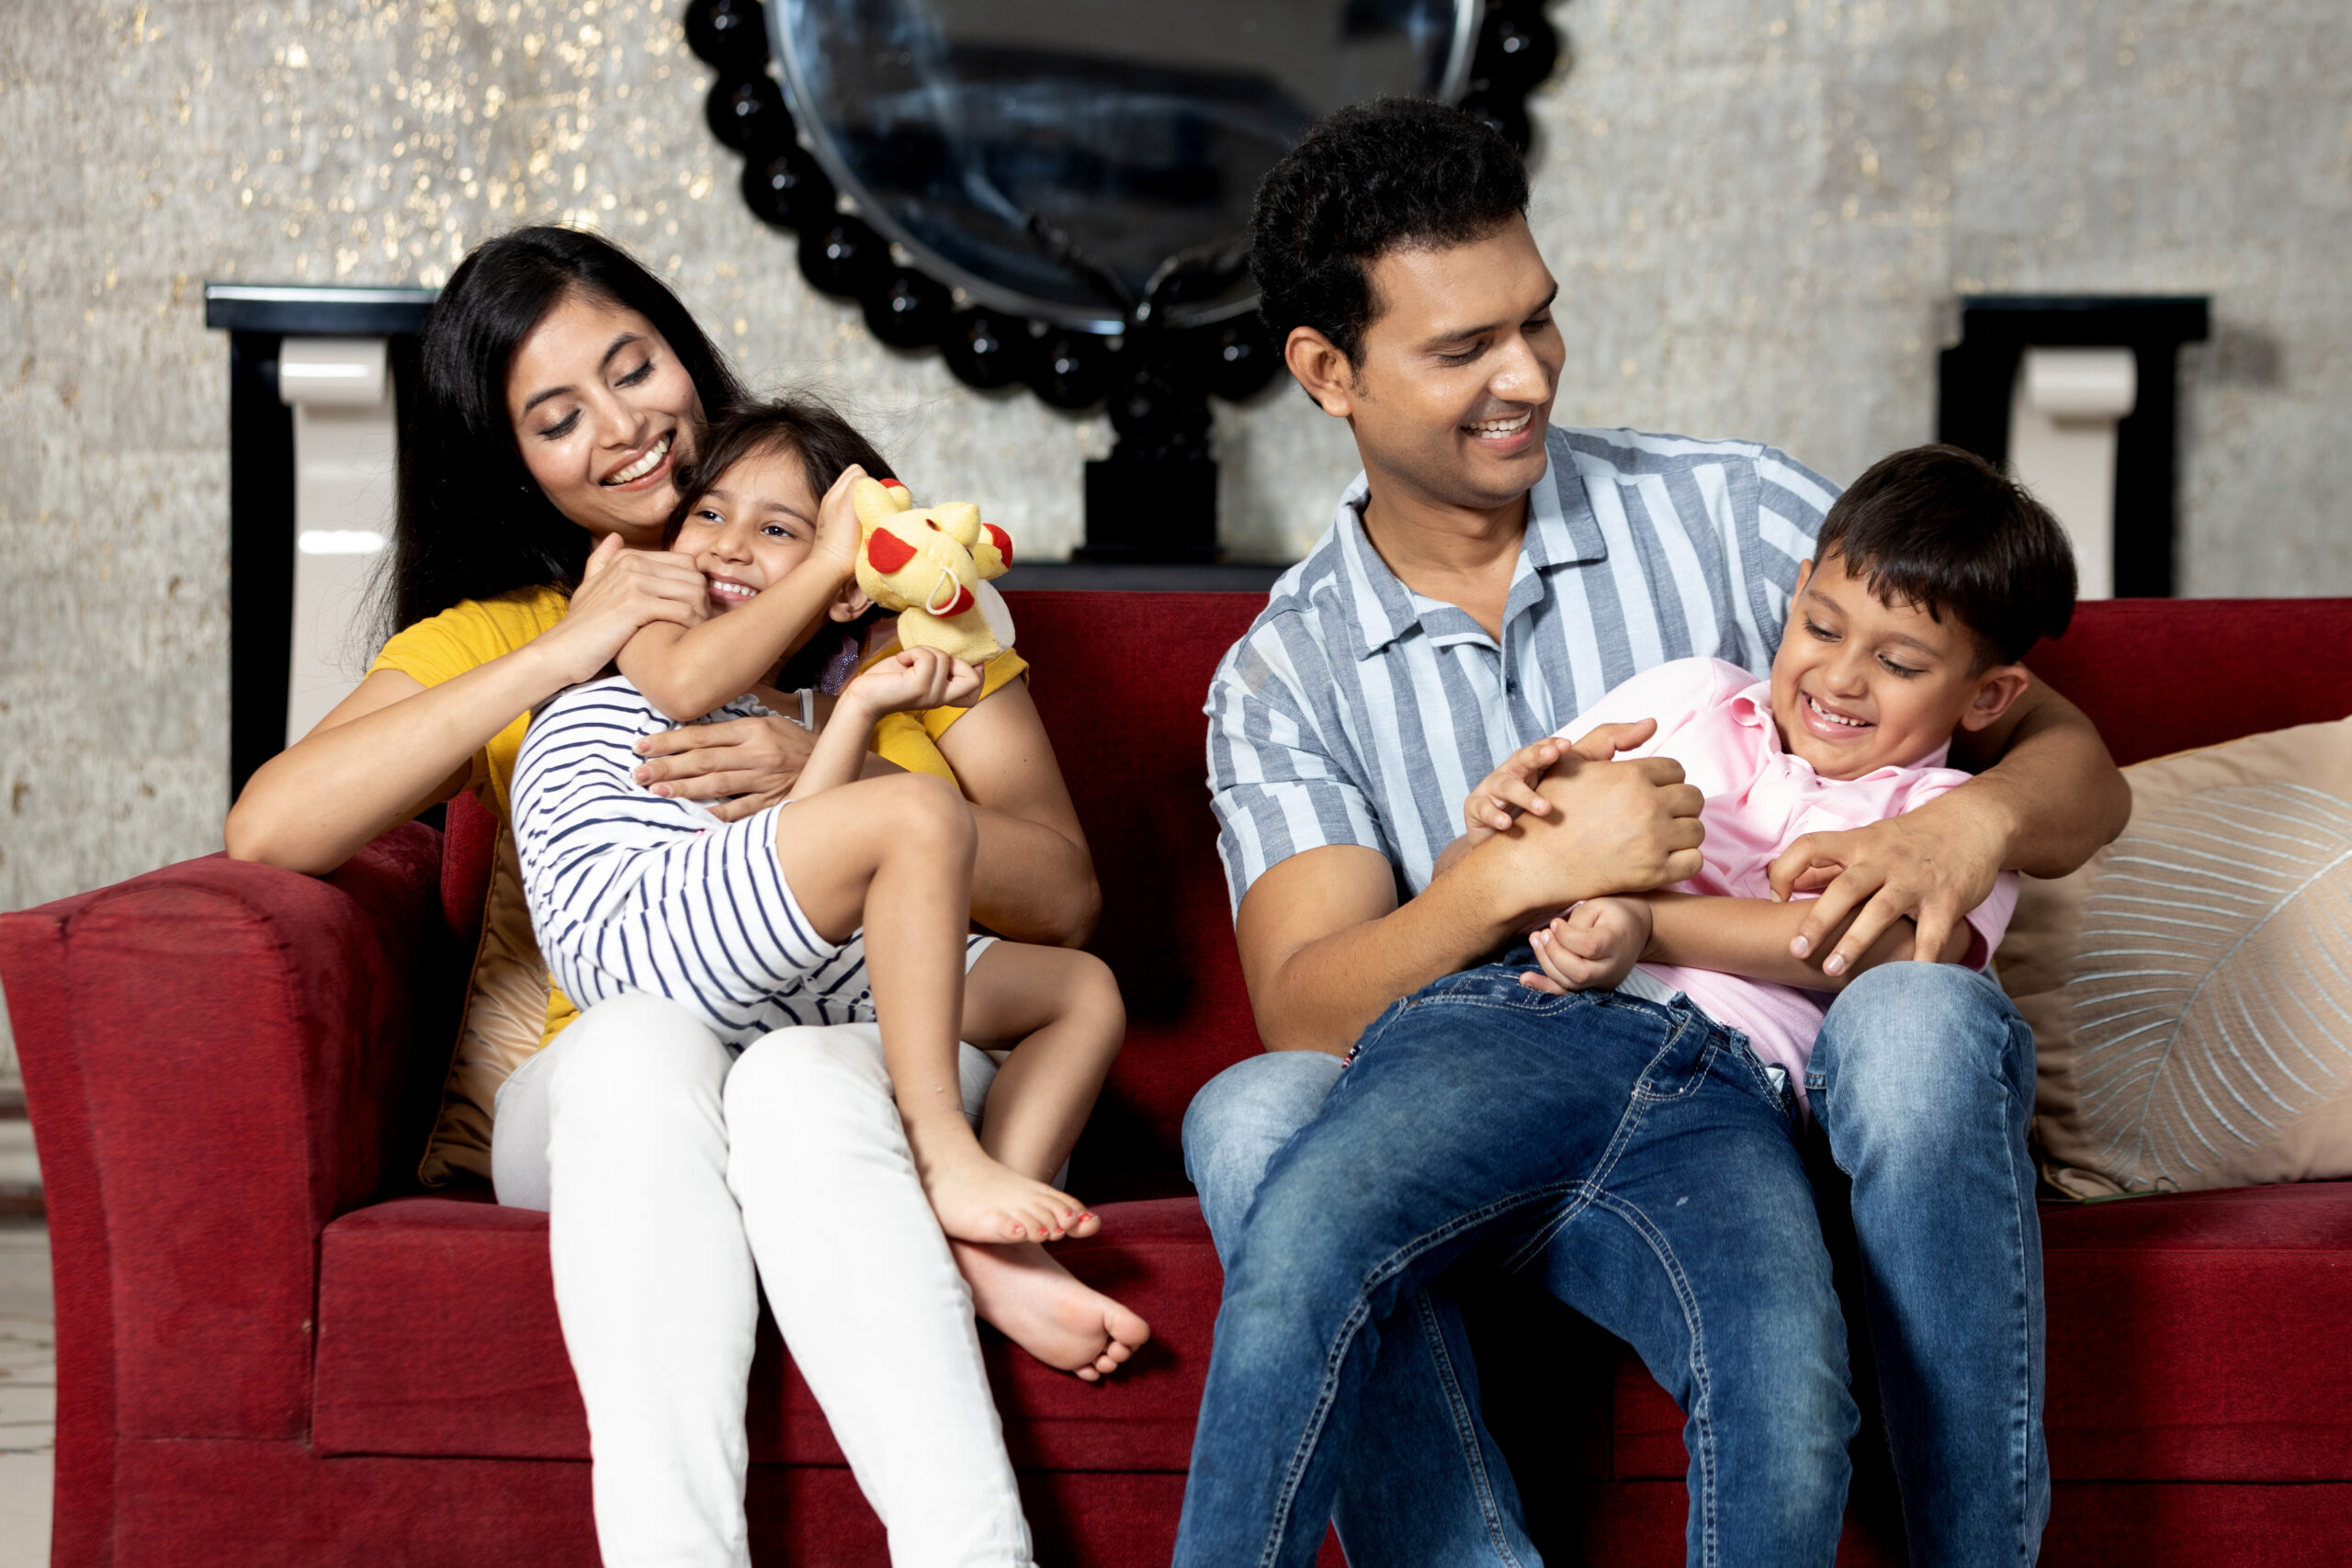 Portrait of Indian family together sitting on sofa in living room looking at each other and having fun.